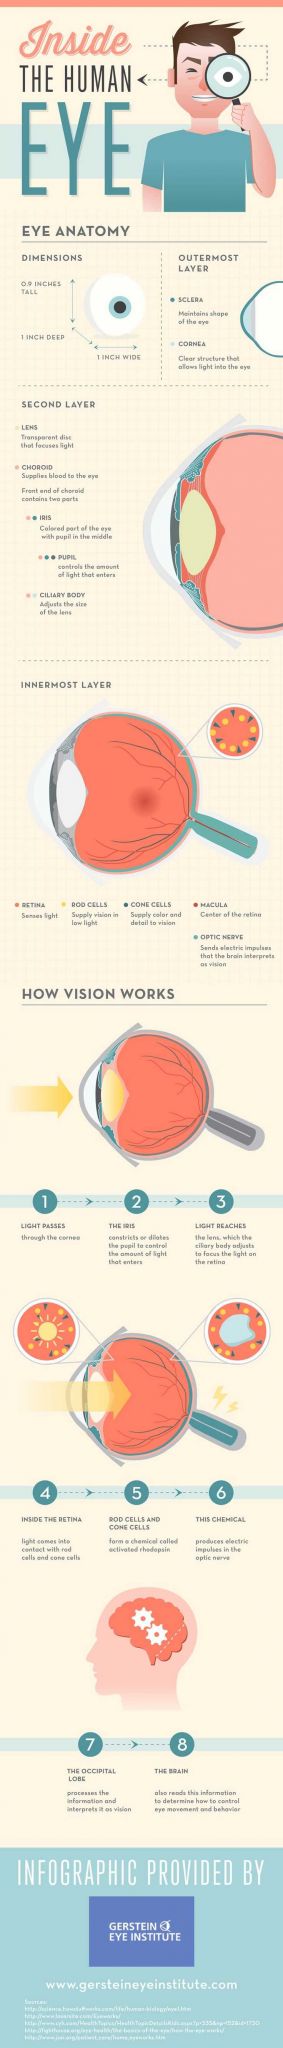 Looking Inside Cells Worksheet Answers as Well as 8 Best Eyes Images On Pinterest